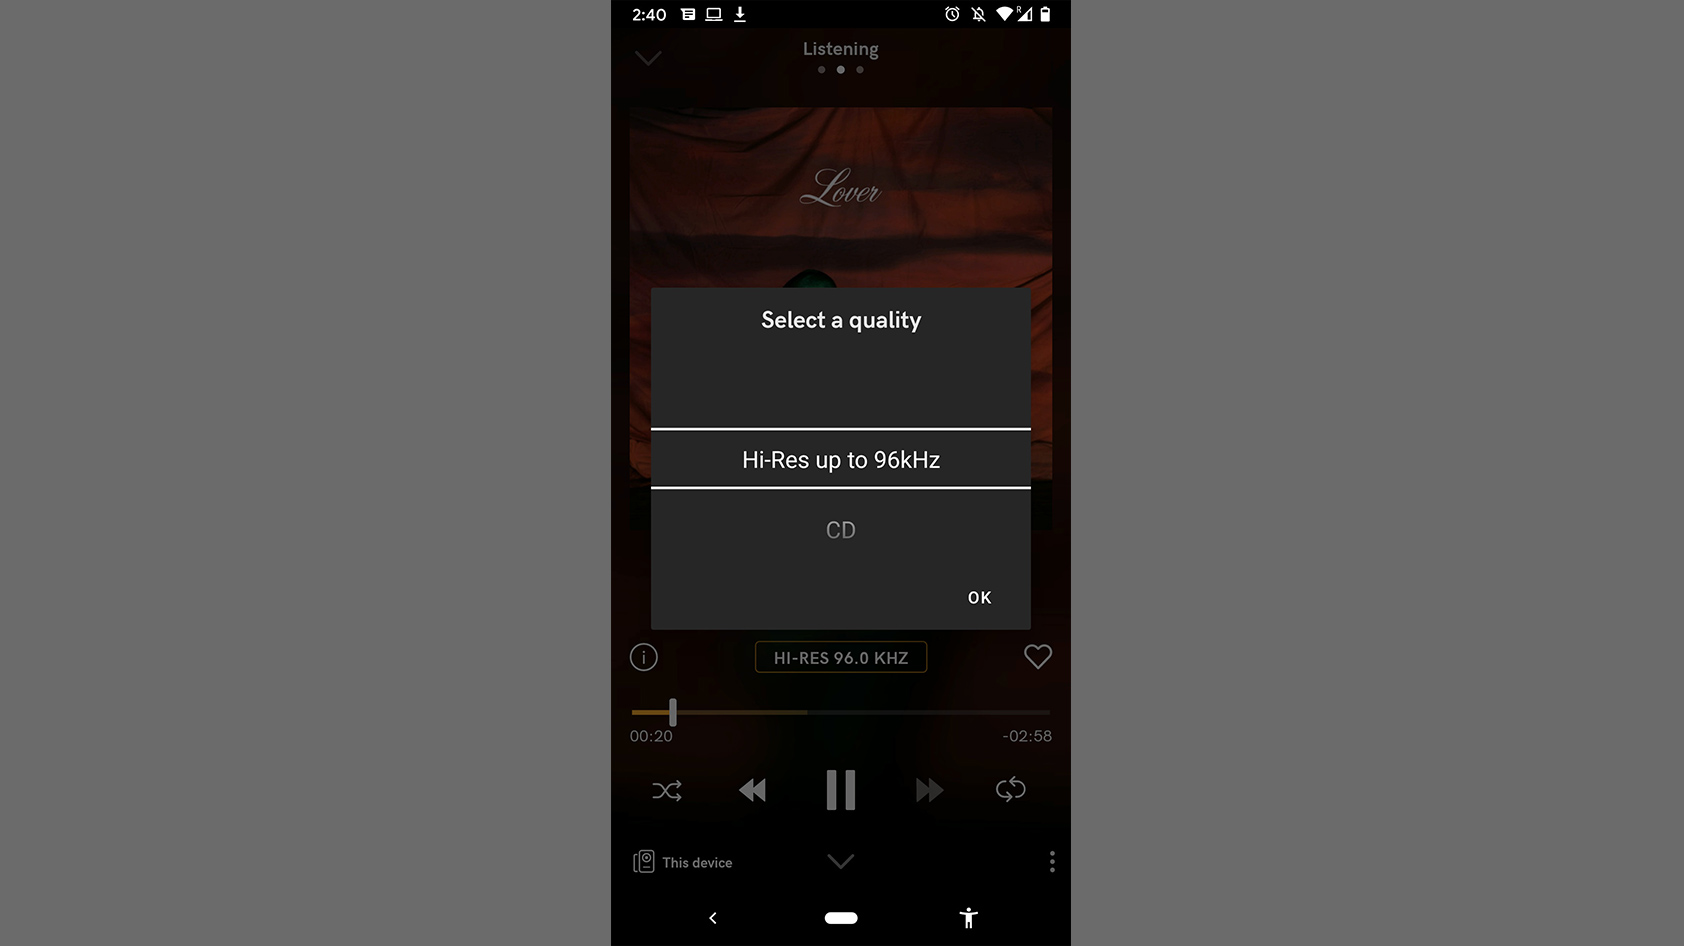 The Android OS Qobuz interface displays streaming qualities for a single track.